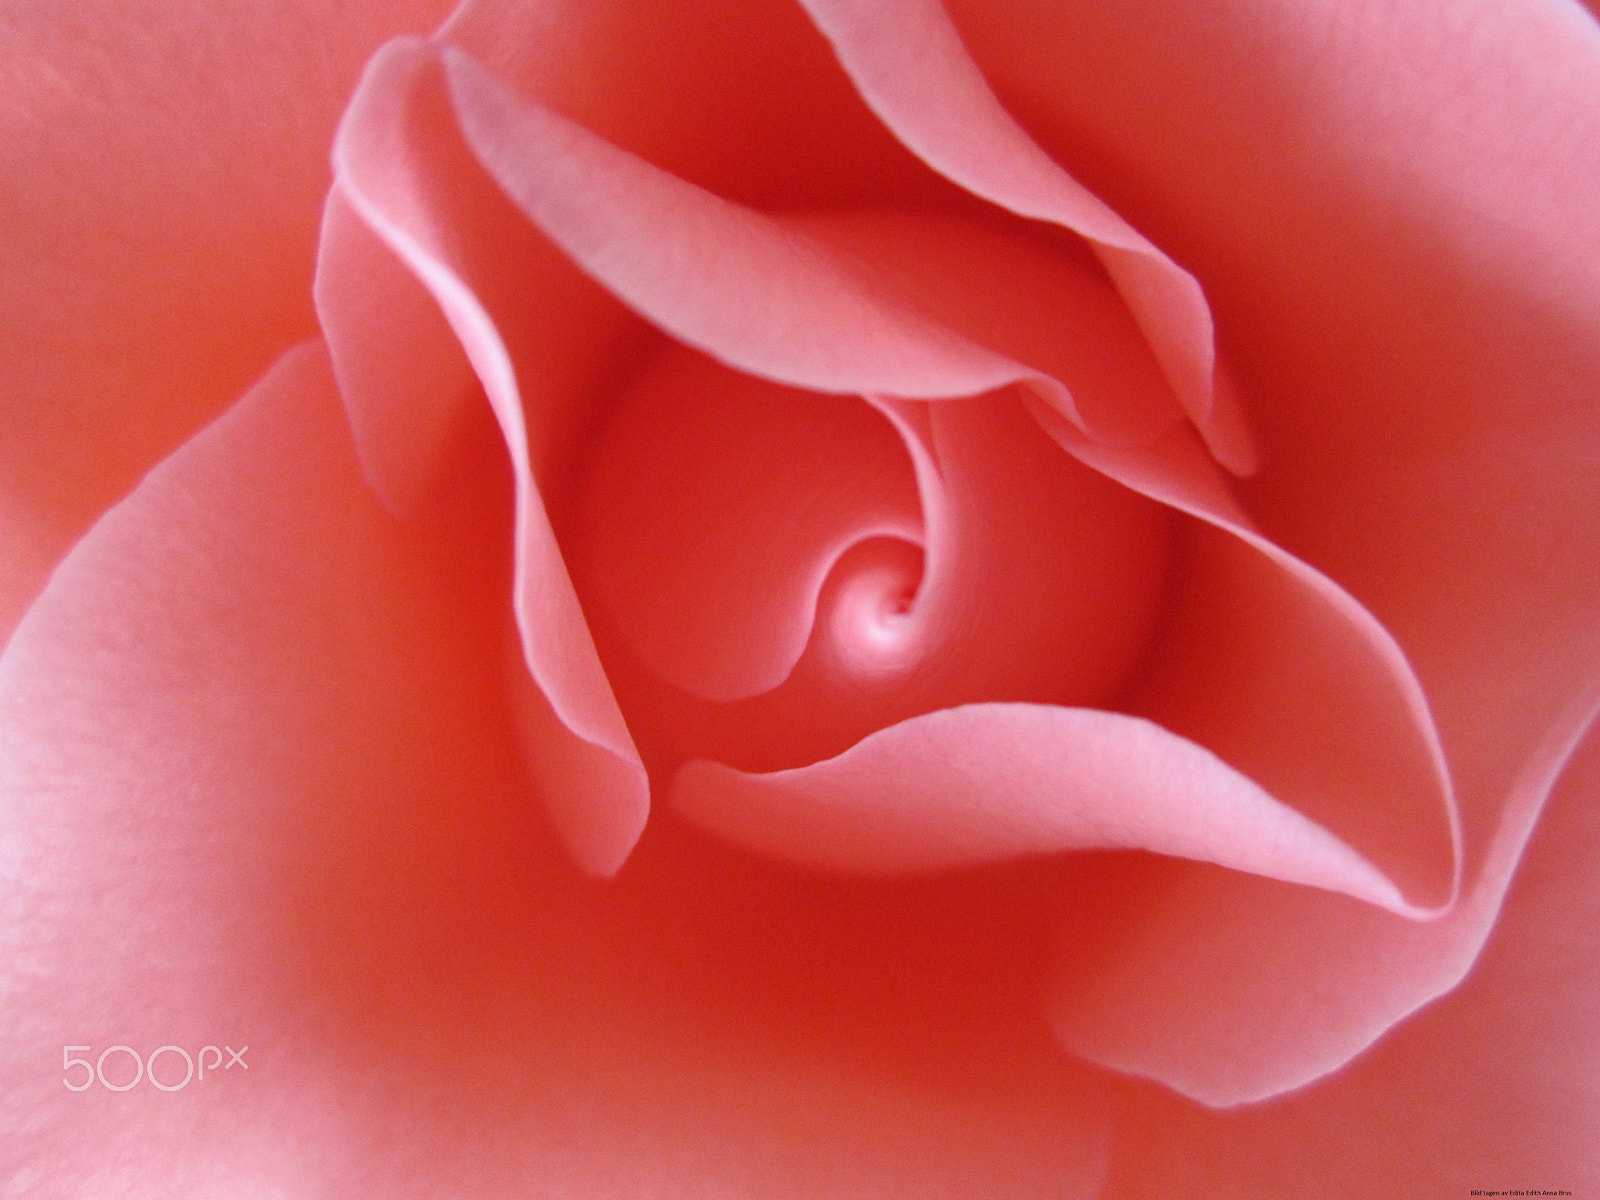 Canon PowerShot SD940 IS (Digital IXUS 120 IS / IXY Digital 220 IS) sample photo. The beauty of roses photography